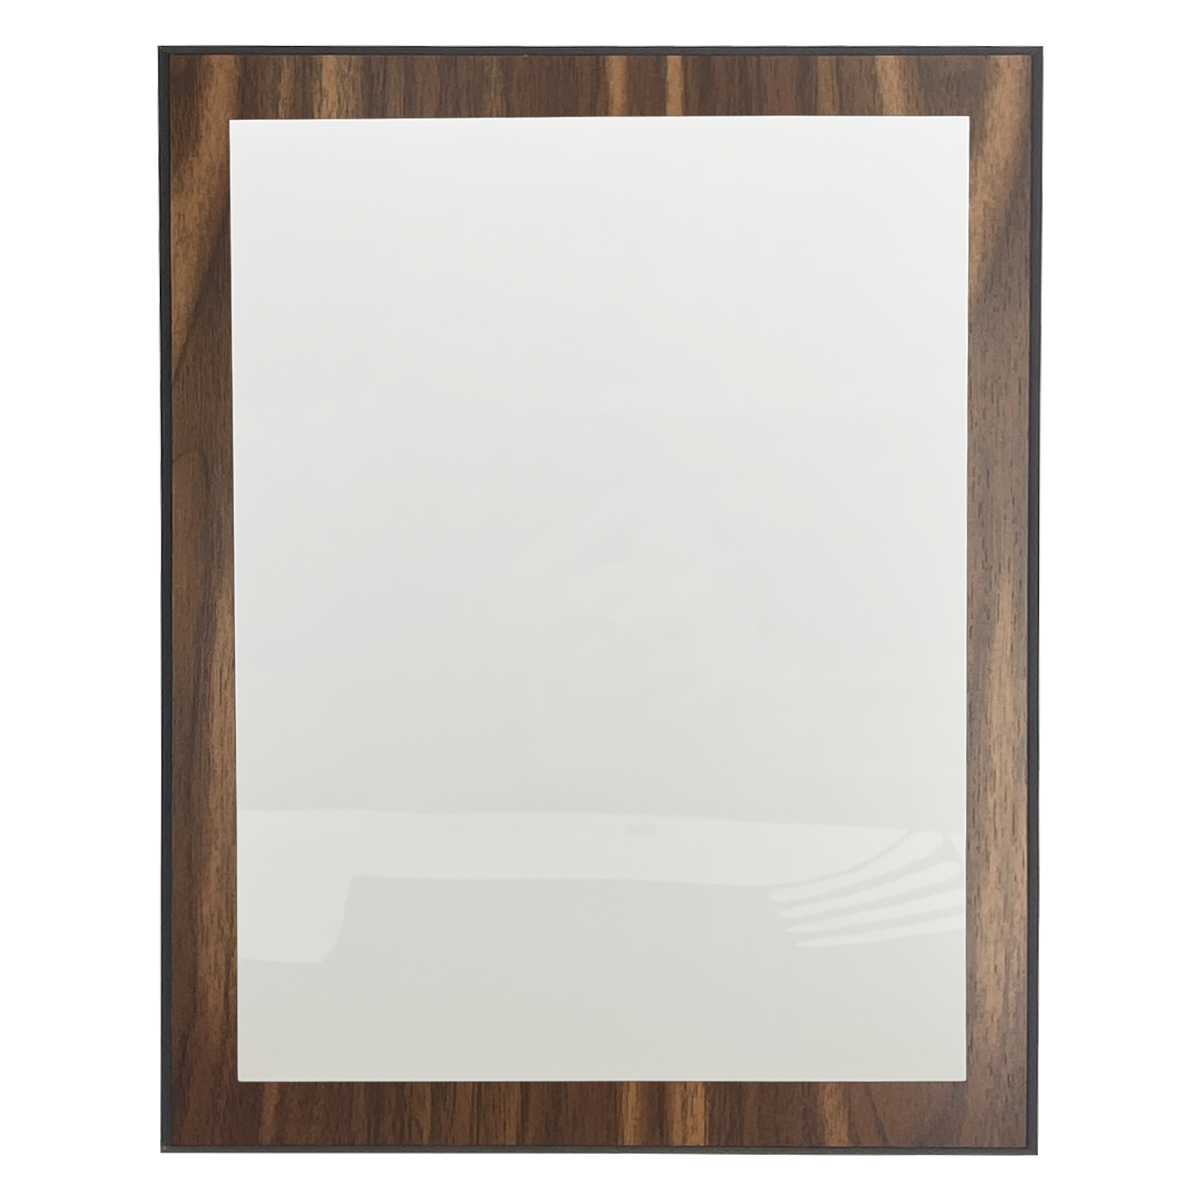 100 Series Plaque in Black or Walnut Finish Board with Full Color Sublimated Plate